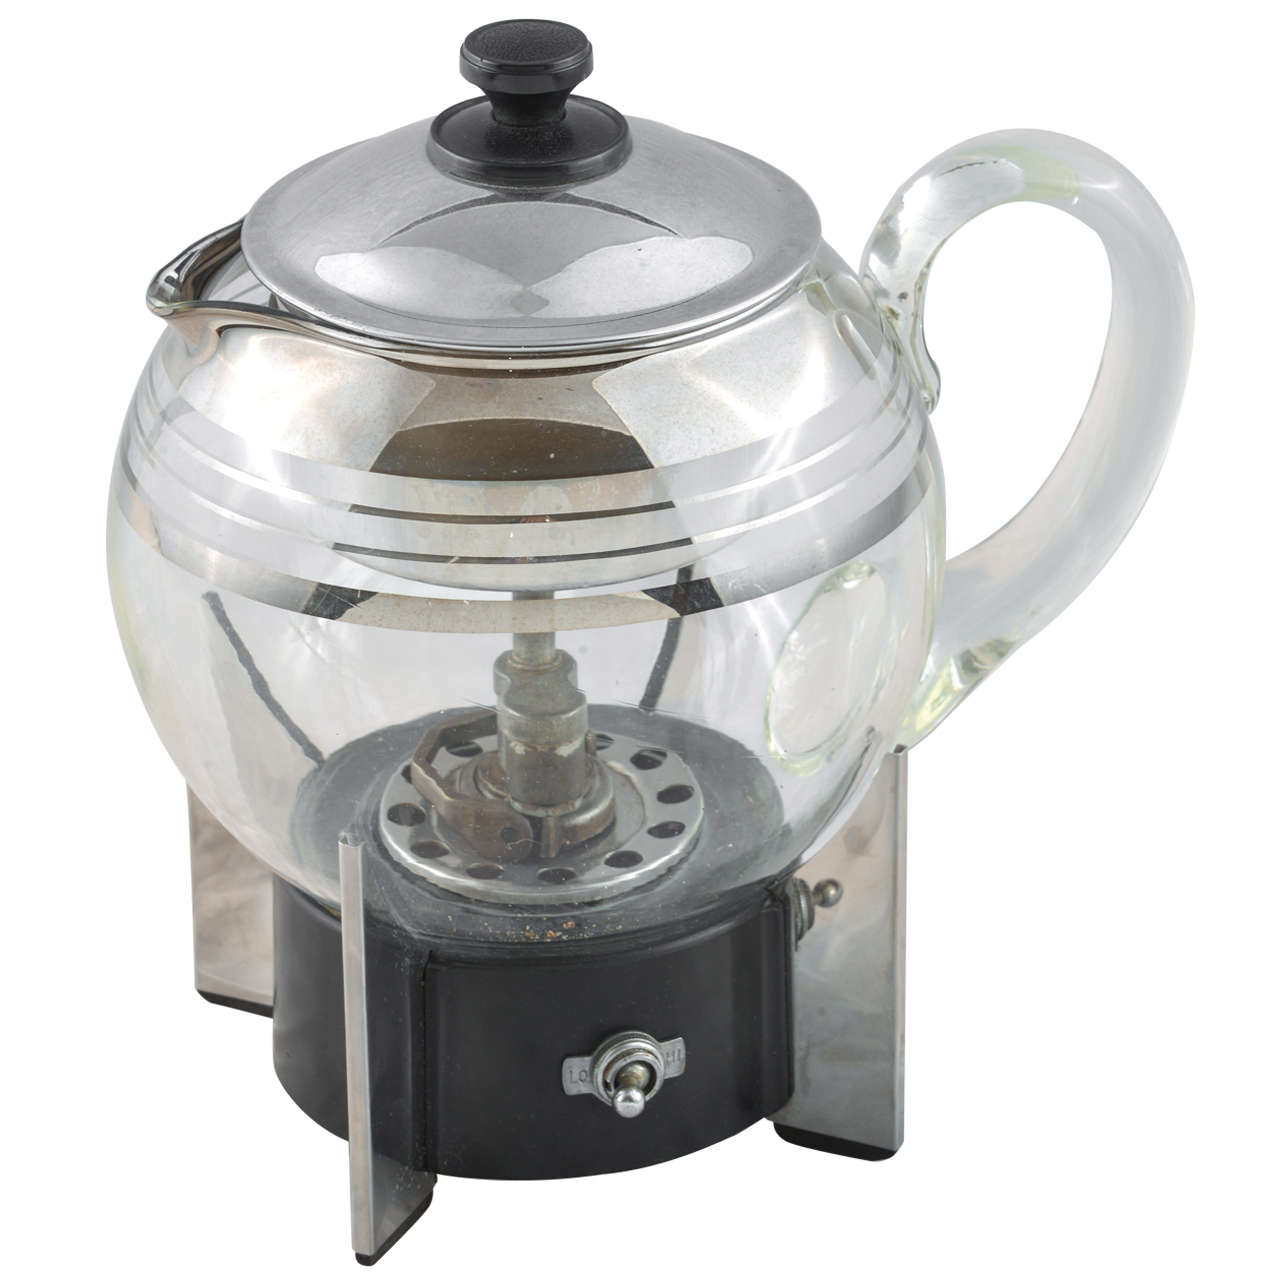 1934 Machine Age Coffee Percolator by Ambrose Olds for Coleman